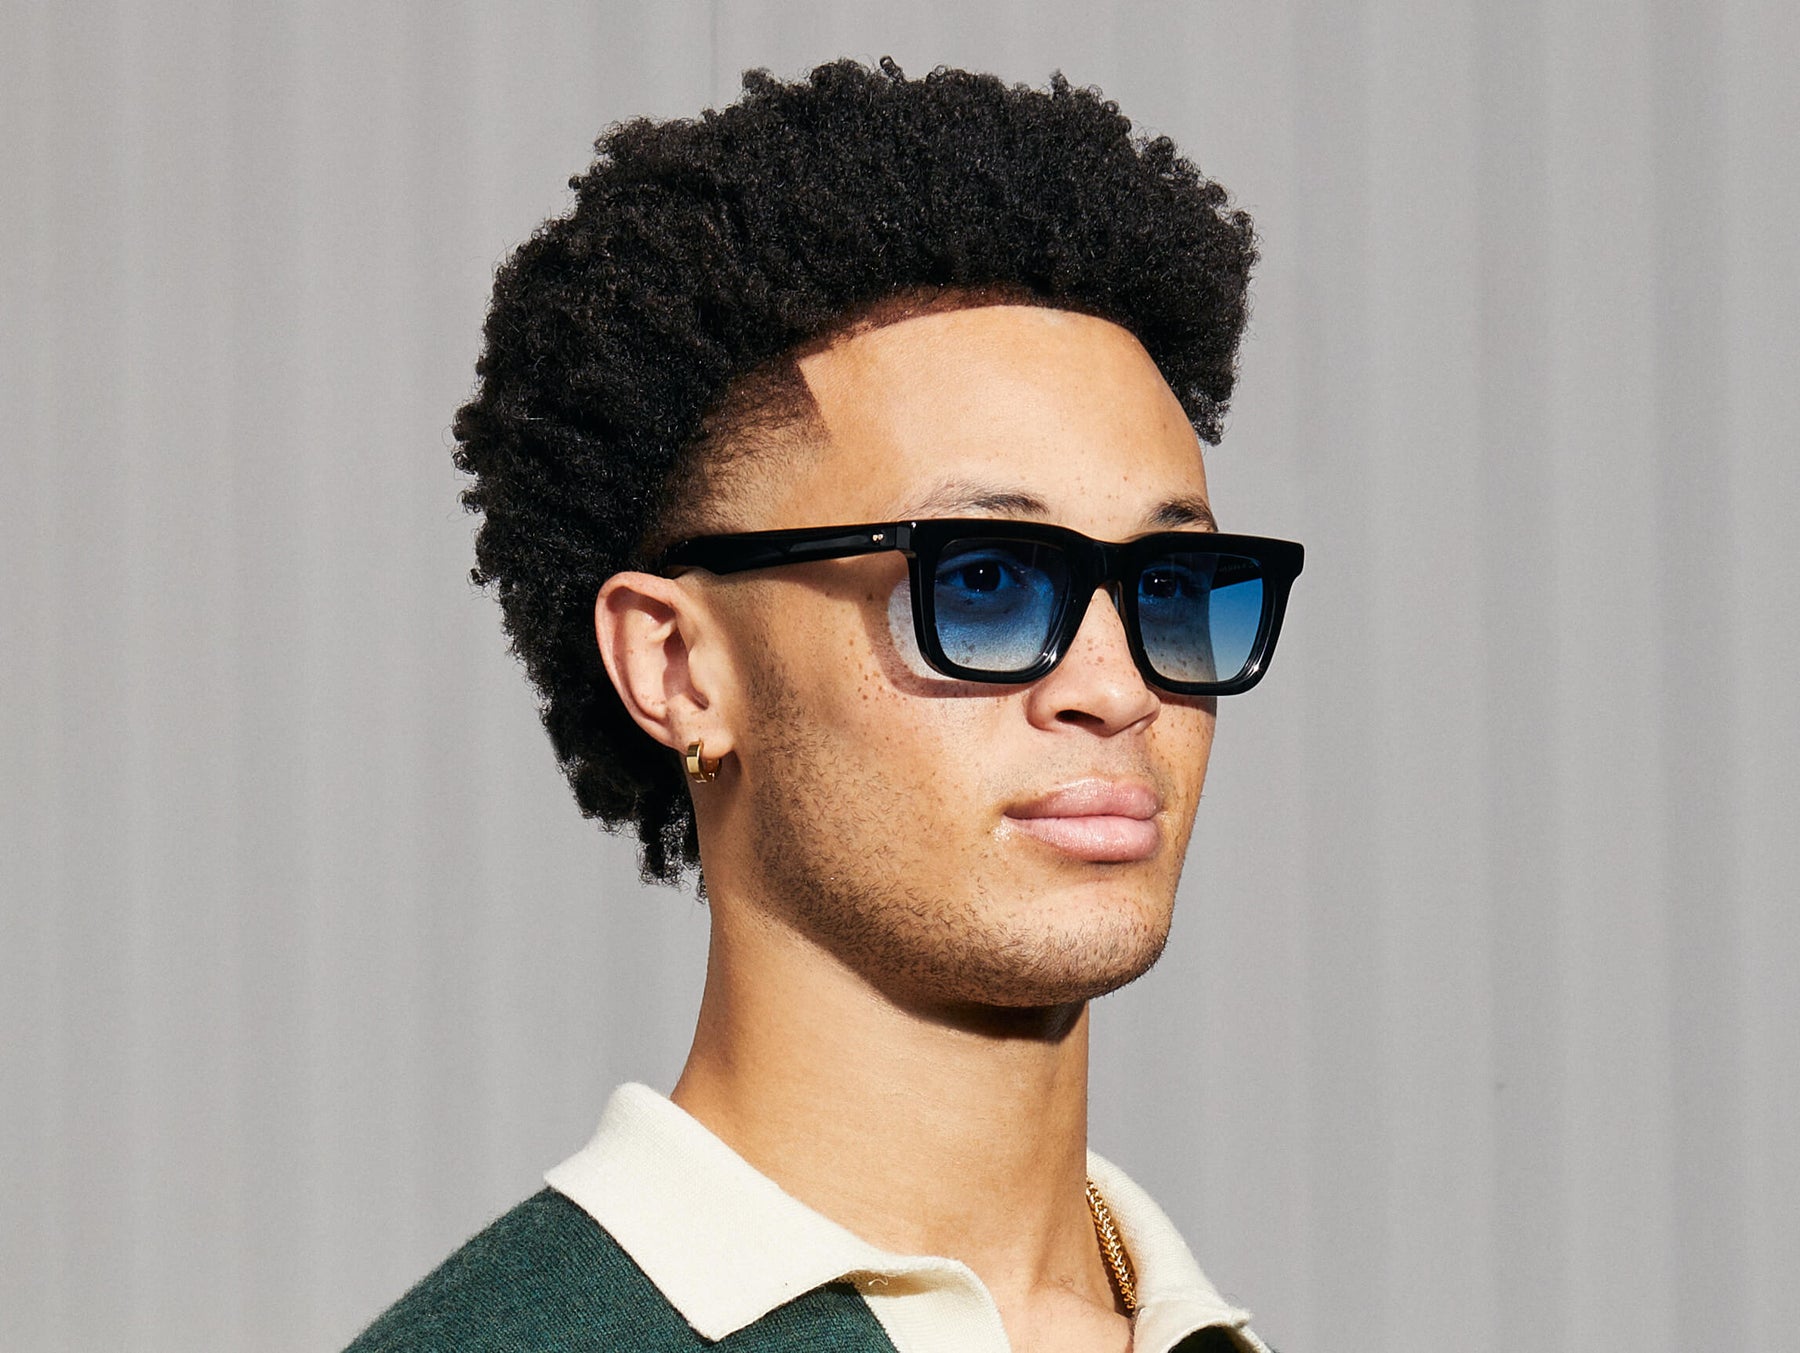 Model is wearing The RIZIK in Black in size 49 with Broadway Blue Fade Tinted Lenses